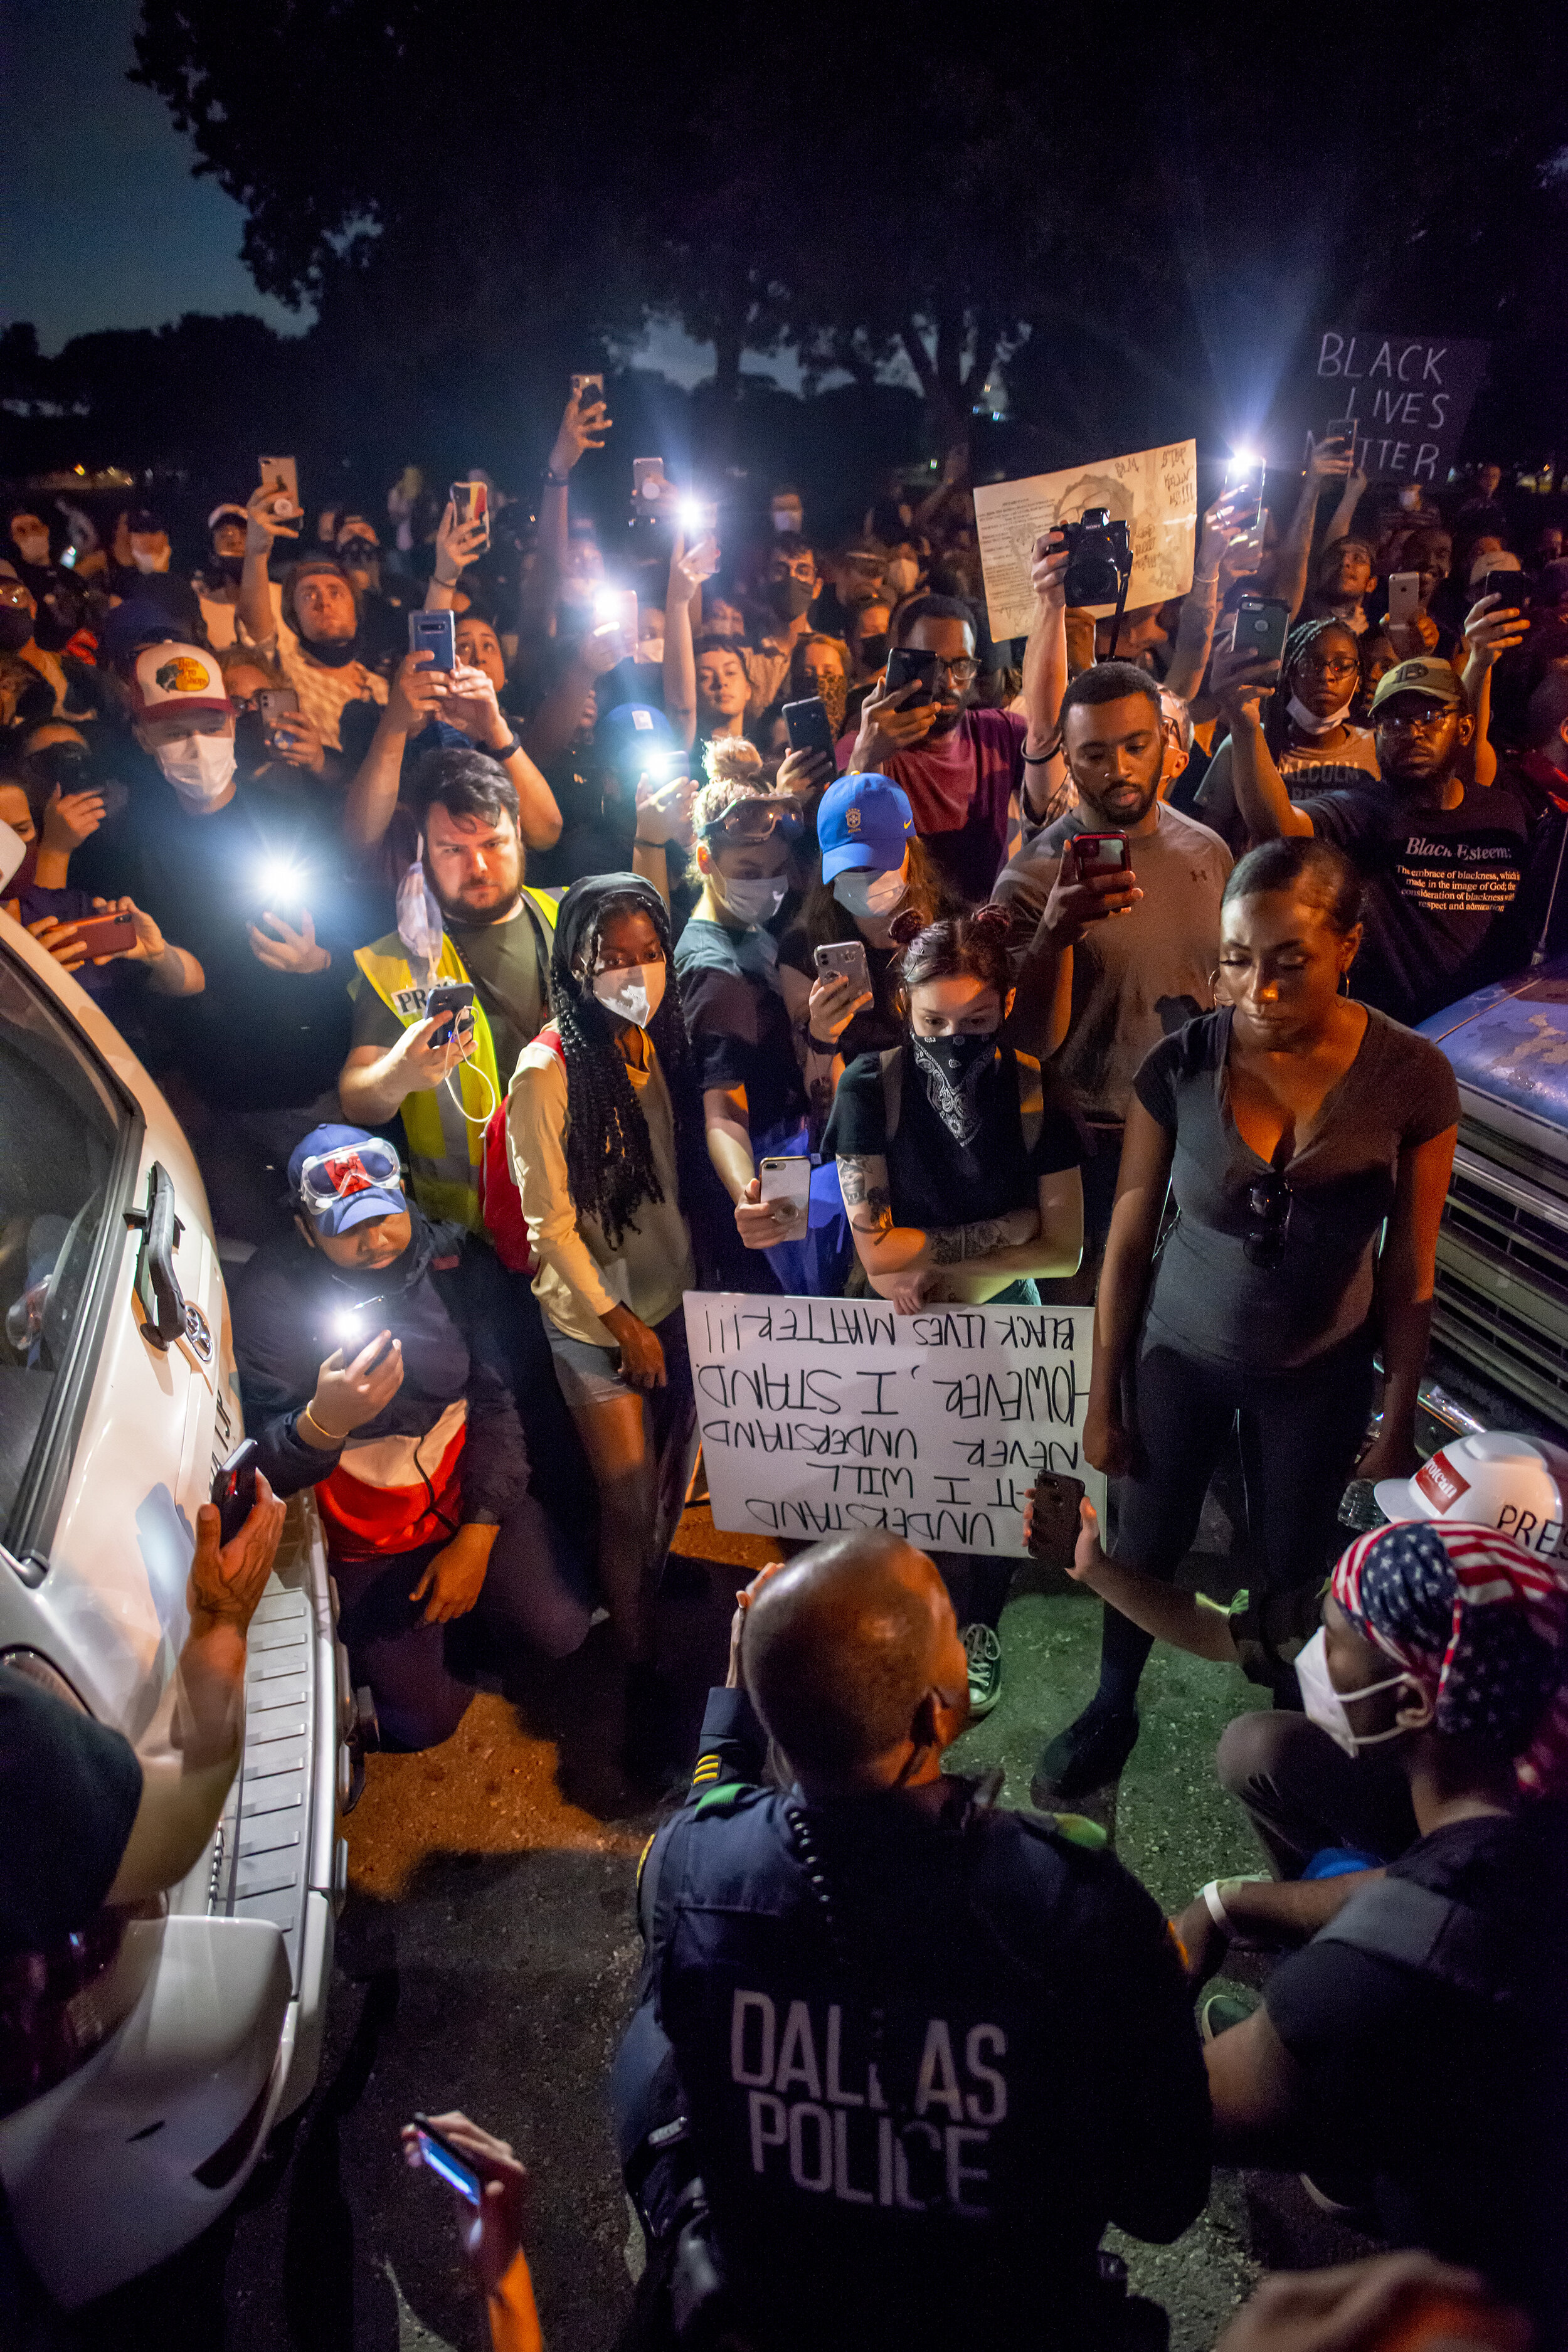  Dallas Police Sgt. Ira Carter takes a knee with protesters at Lake Cliff Park in the Oak Cliff neighborhood of Dallas, TX on June 2, 2020.  Carter expressed support for the protesters but cautioned them to remain peaceful.  Unlike previous nights of